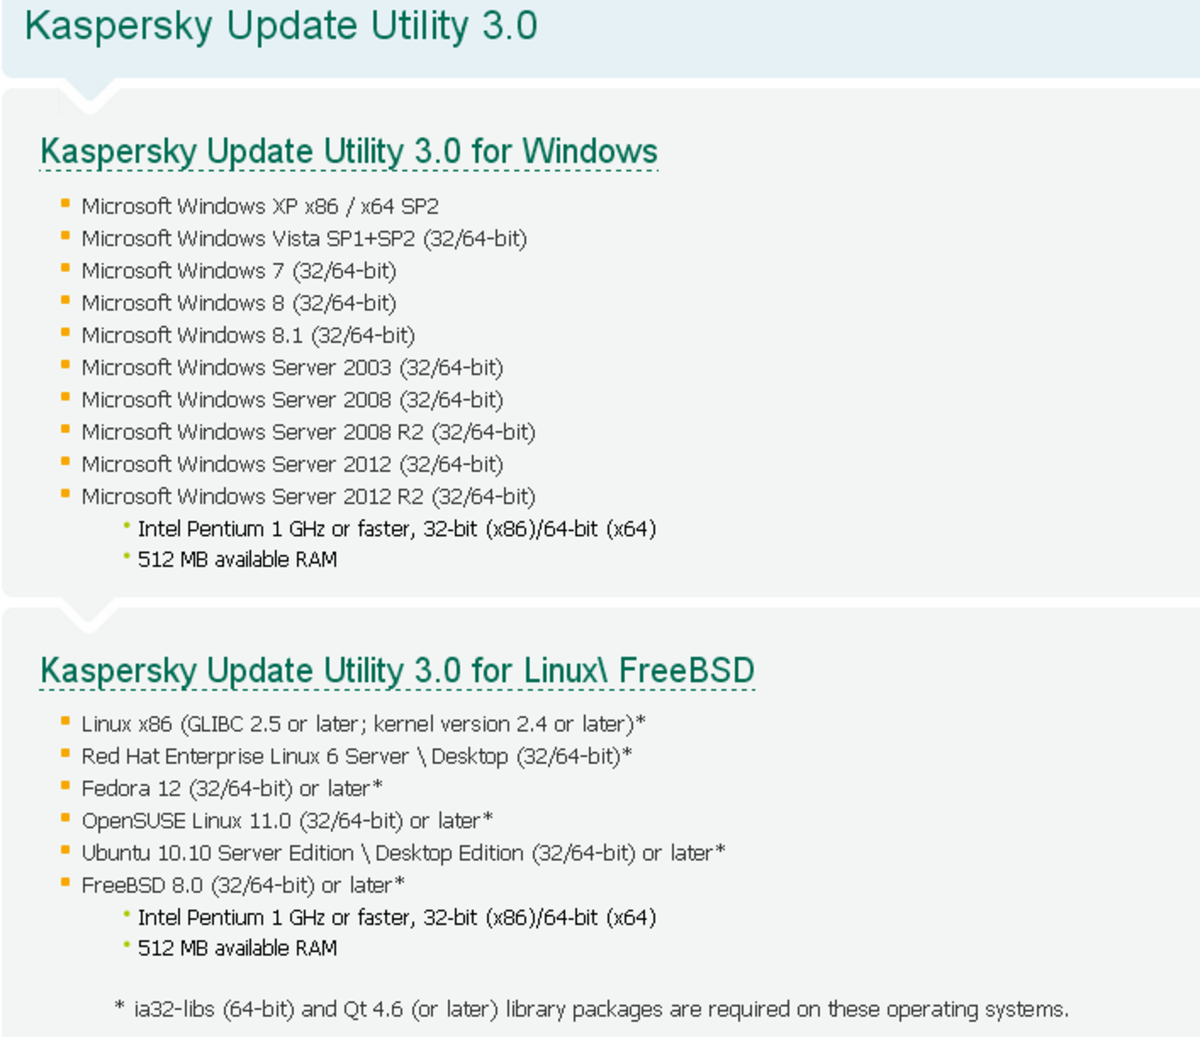 System Requirements: Kaspersky Update Utility 3.0 for Windows, Kaspersky Update Utility 3.0 for Linux\ FreeBSD